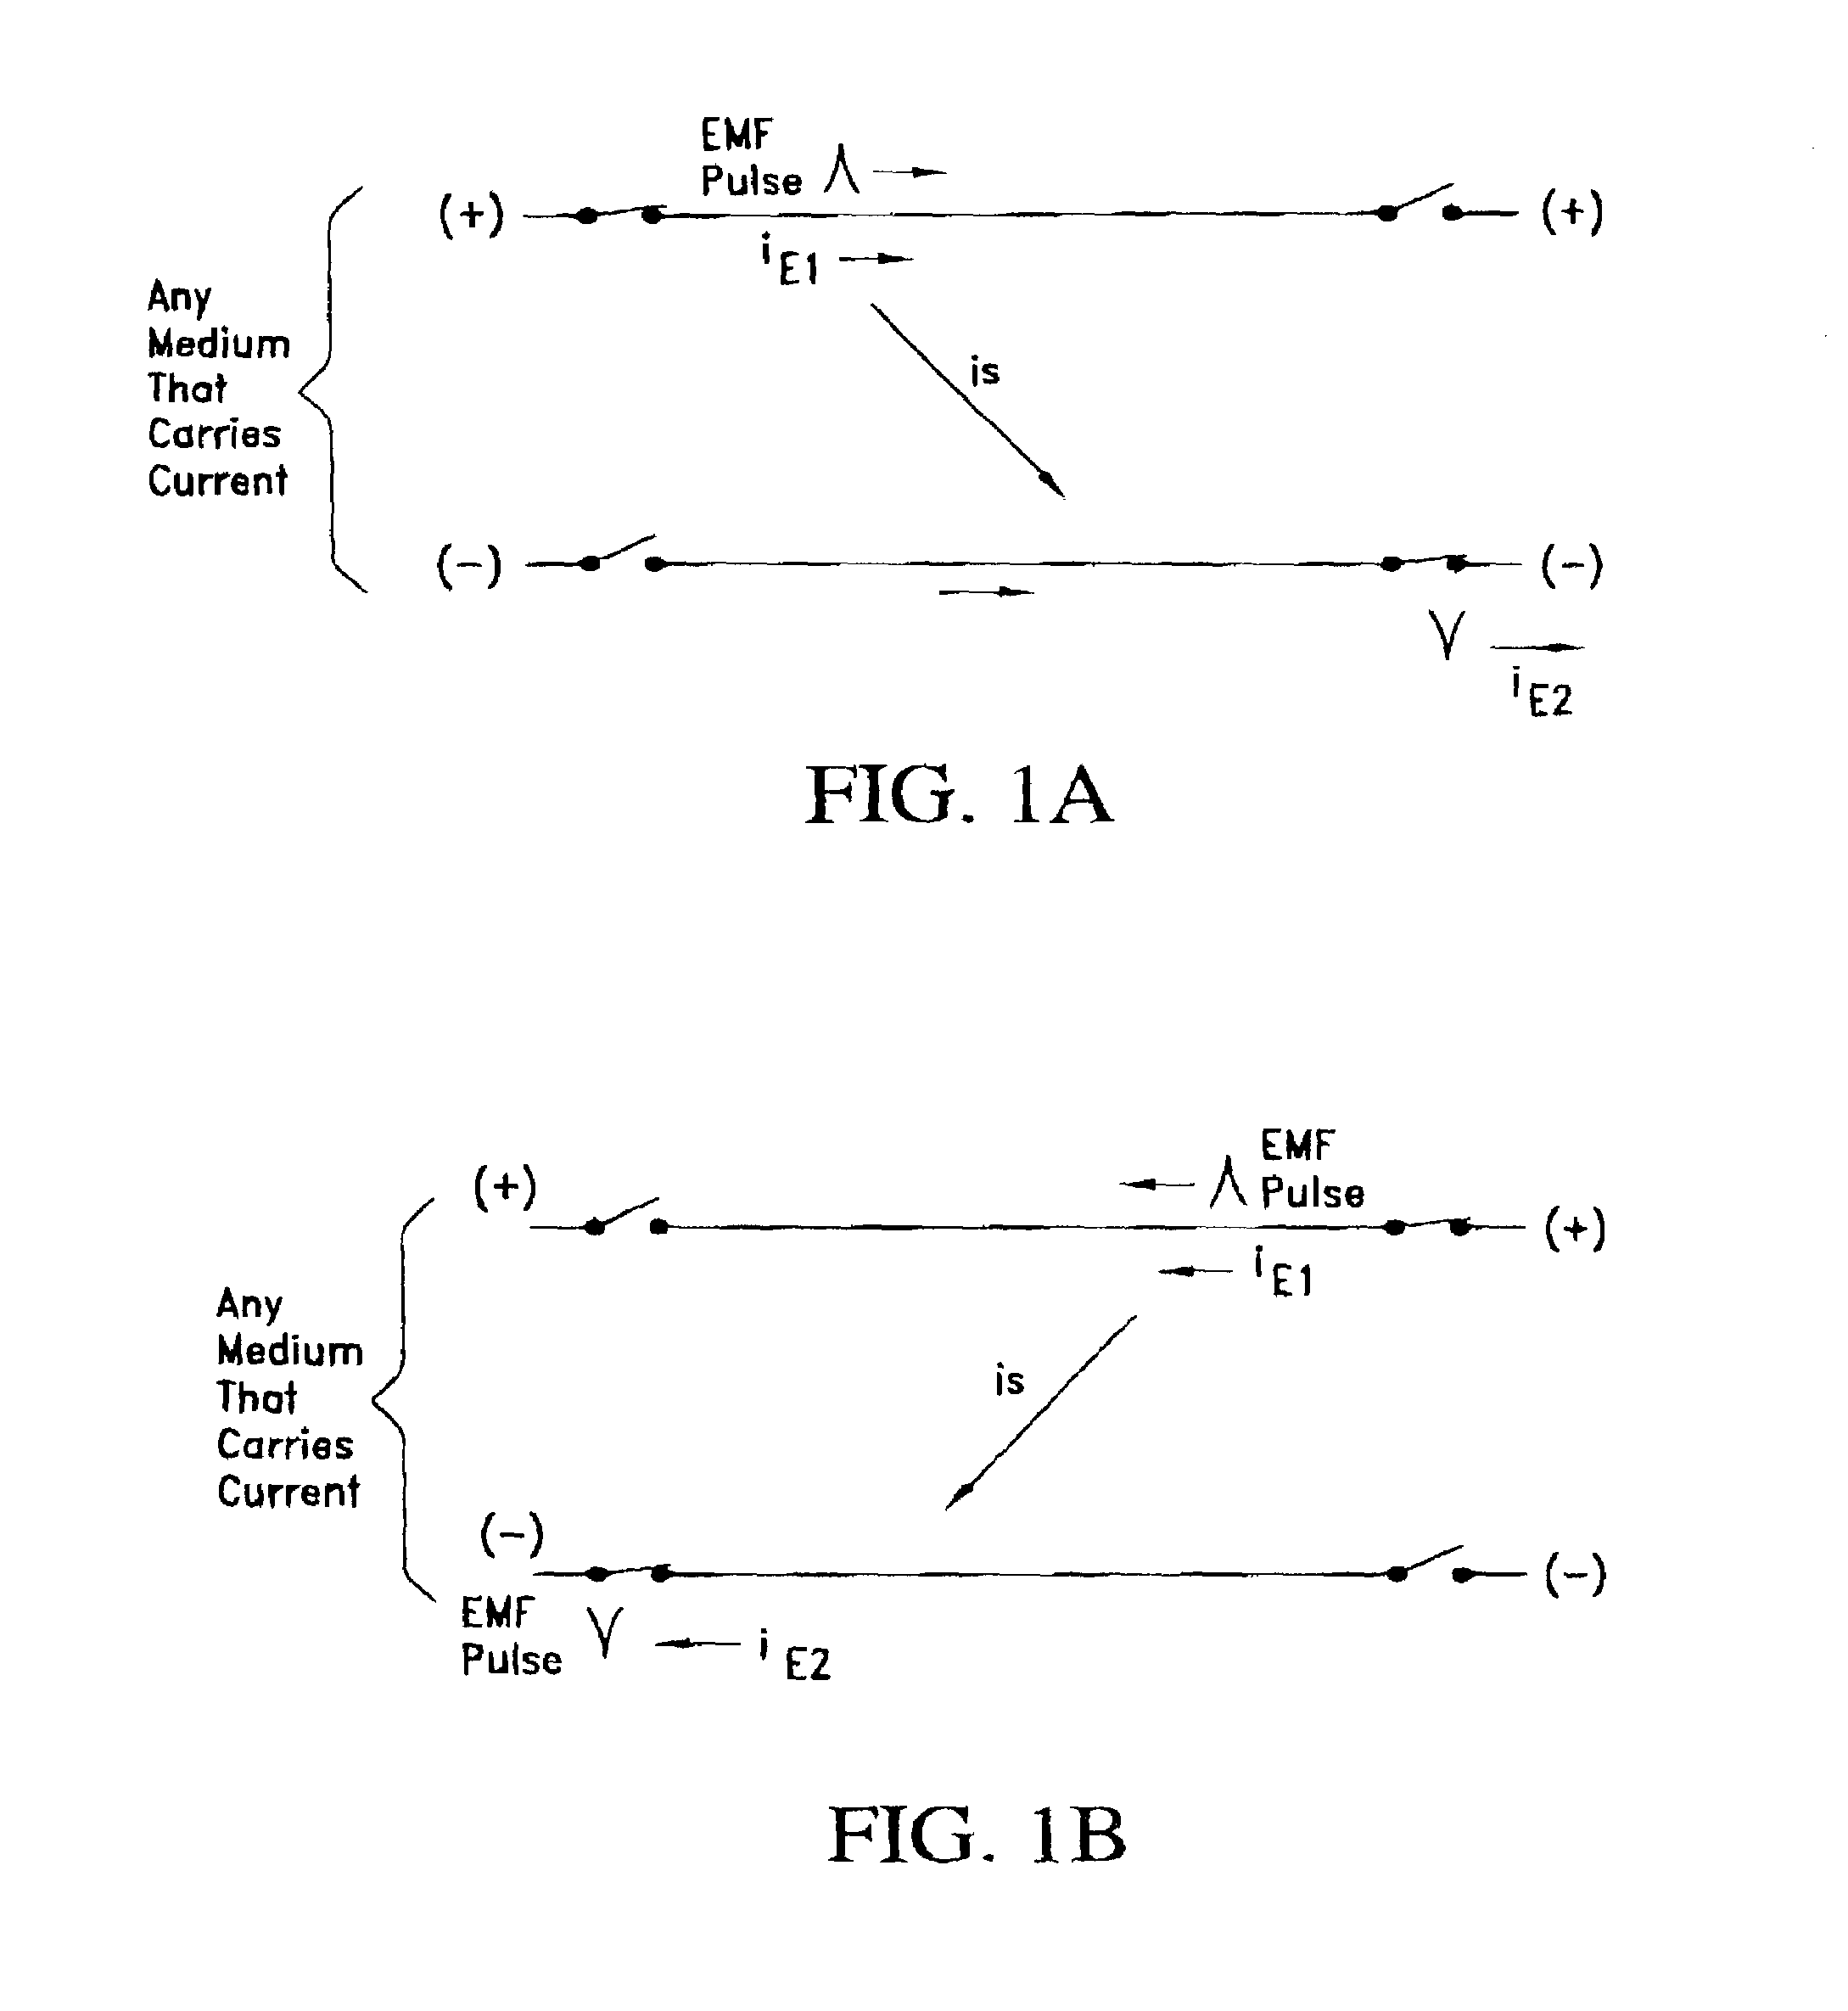 Apparatus and method for generating and using multi-direction DC and AC electrical currents